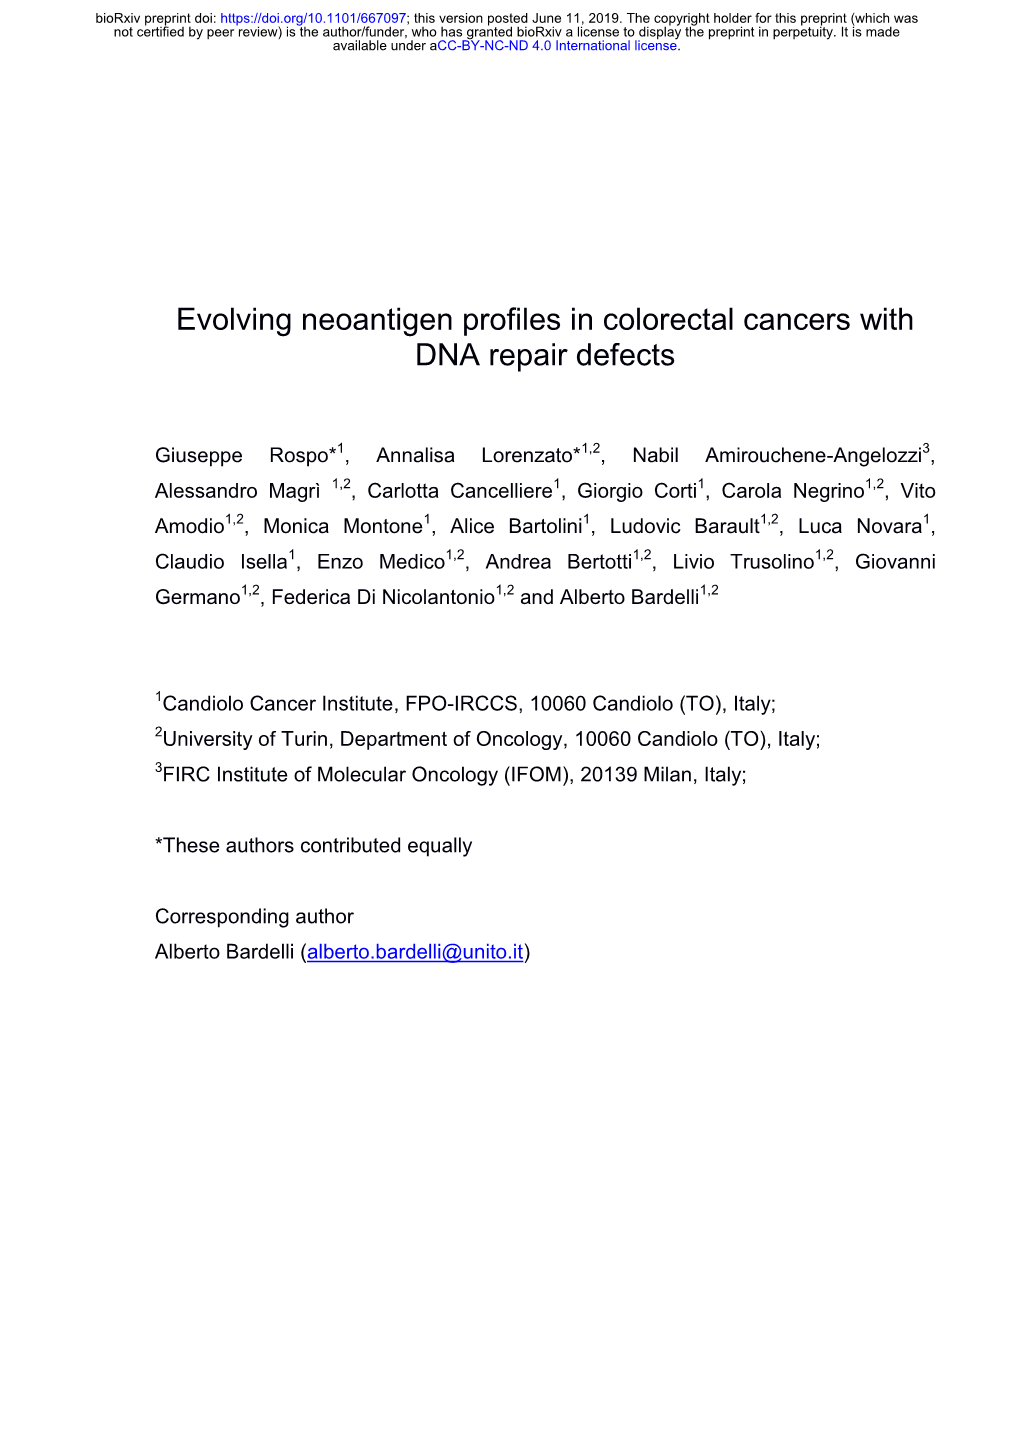 Evolving Neoantigen Profiles in Colorectal Cancers with DNA Repair Defects